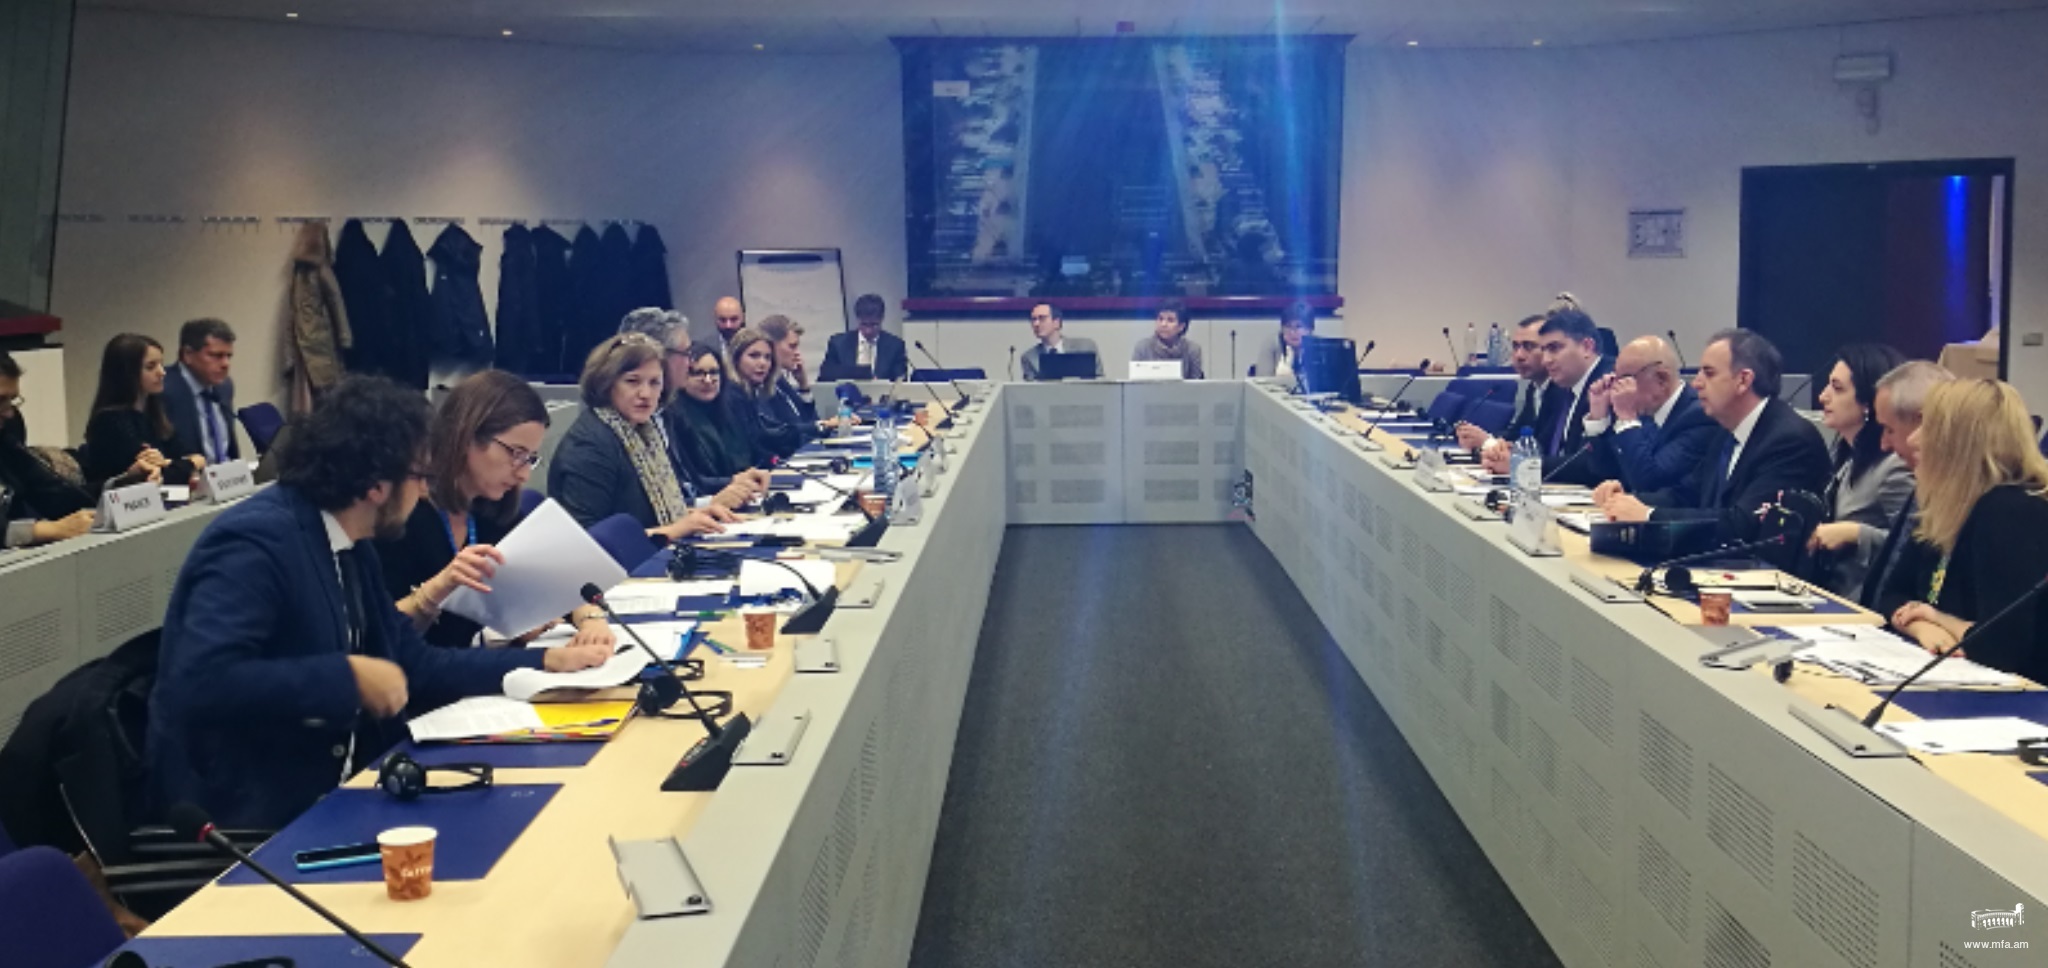 The second high-level meeting on Mobility Partnership between Armenia and the EU was held in Brussels